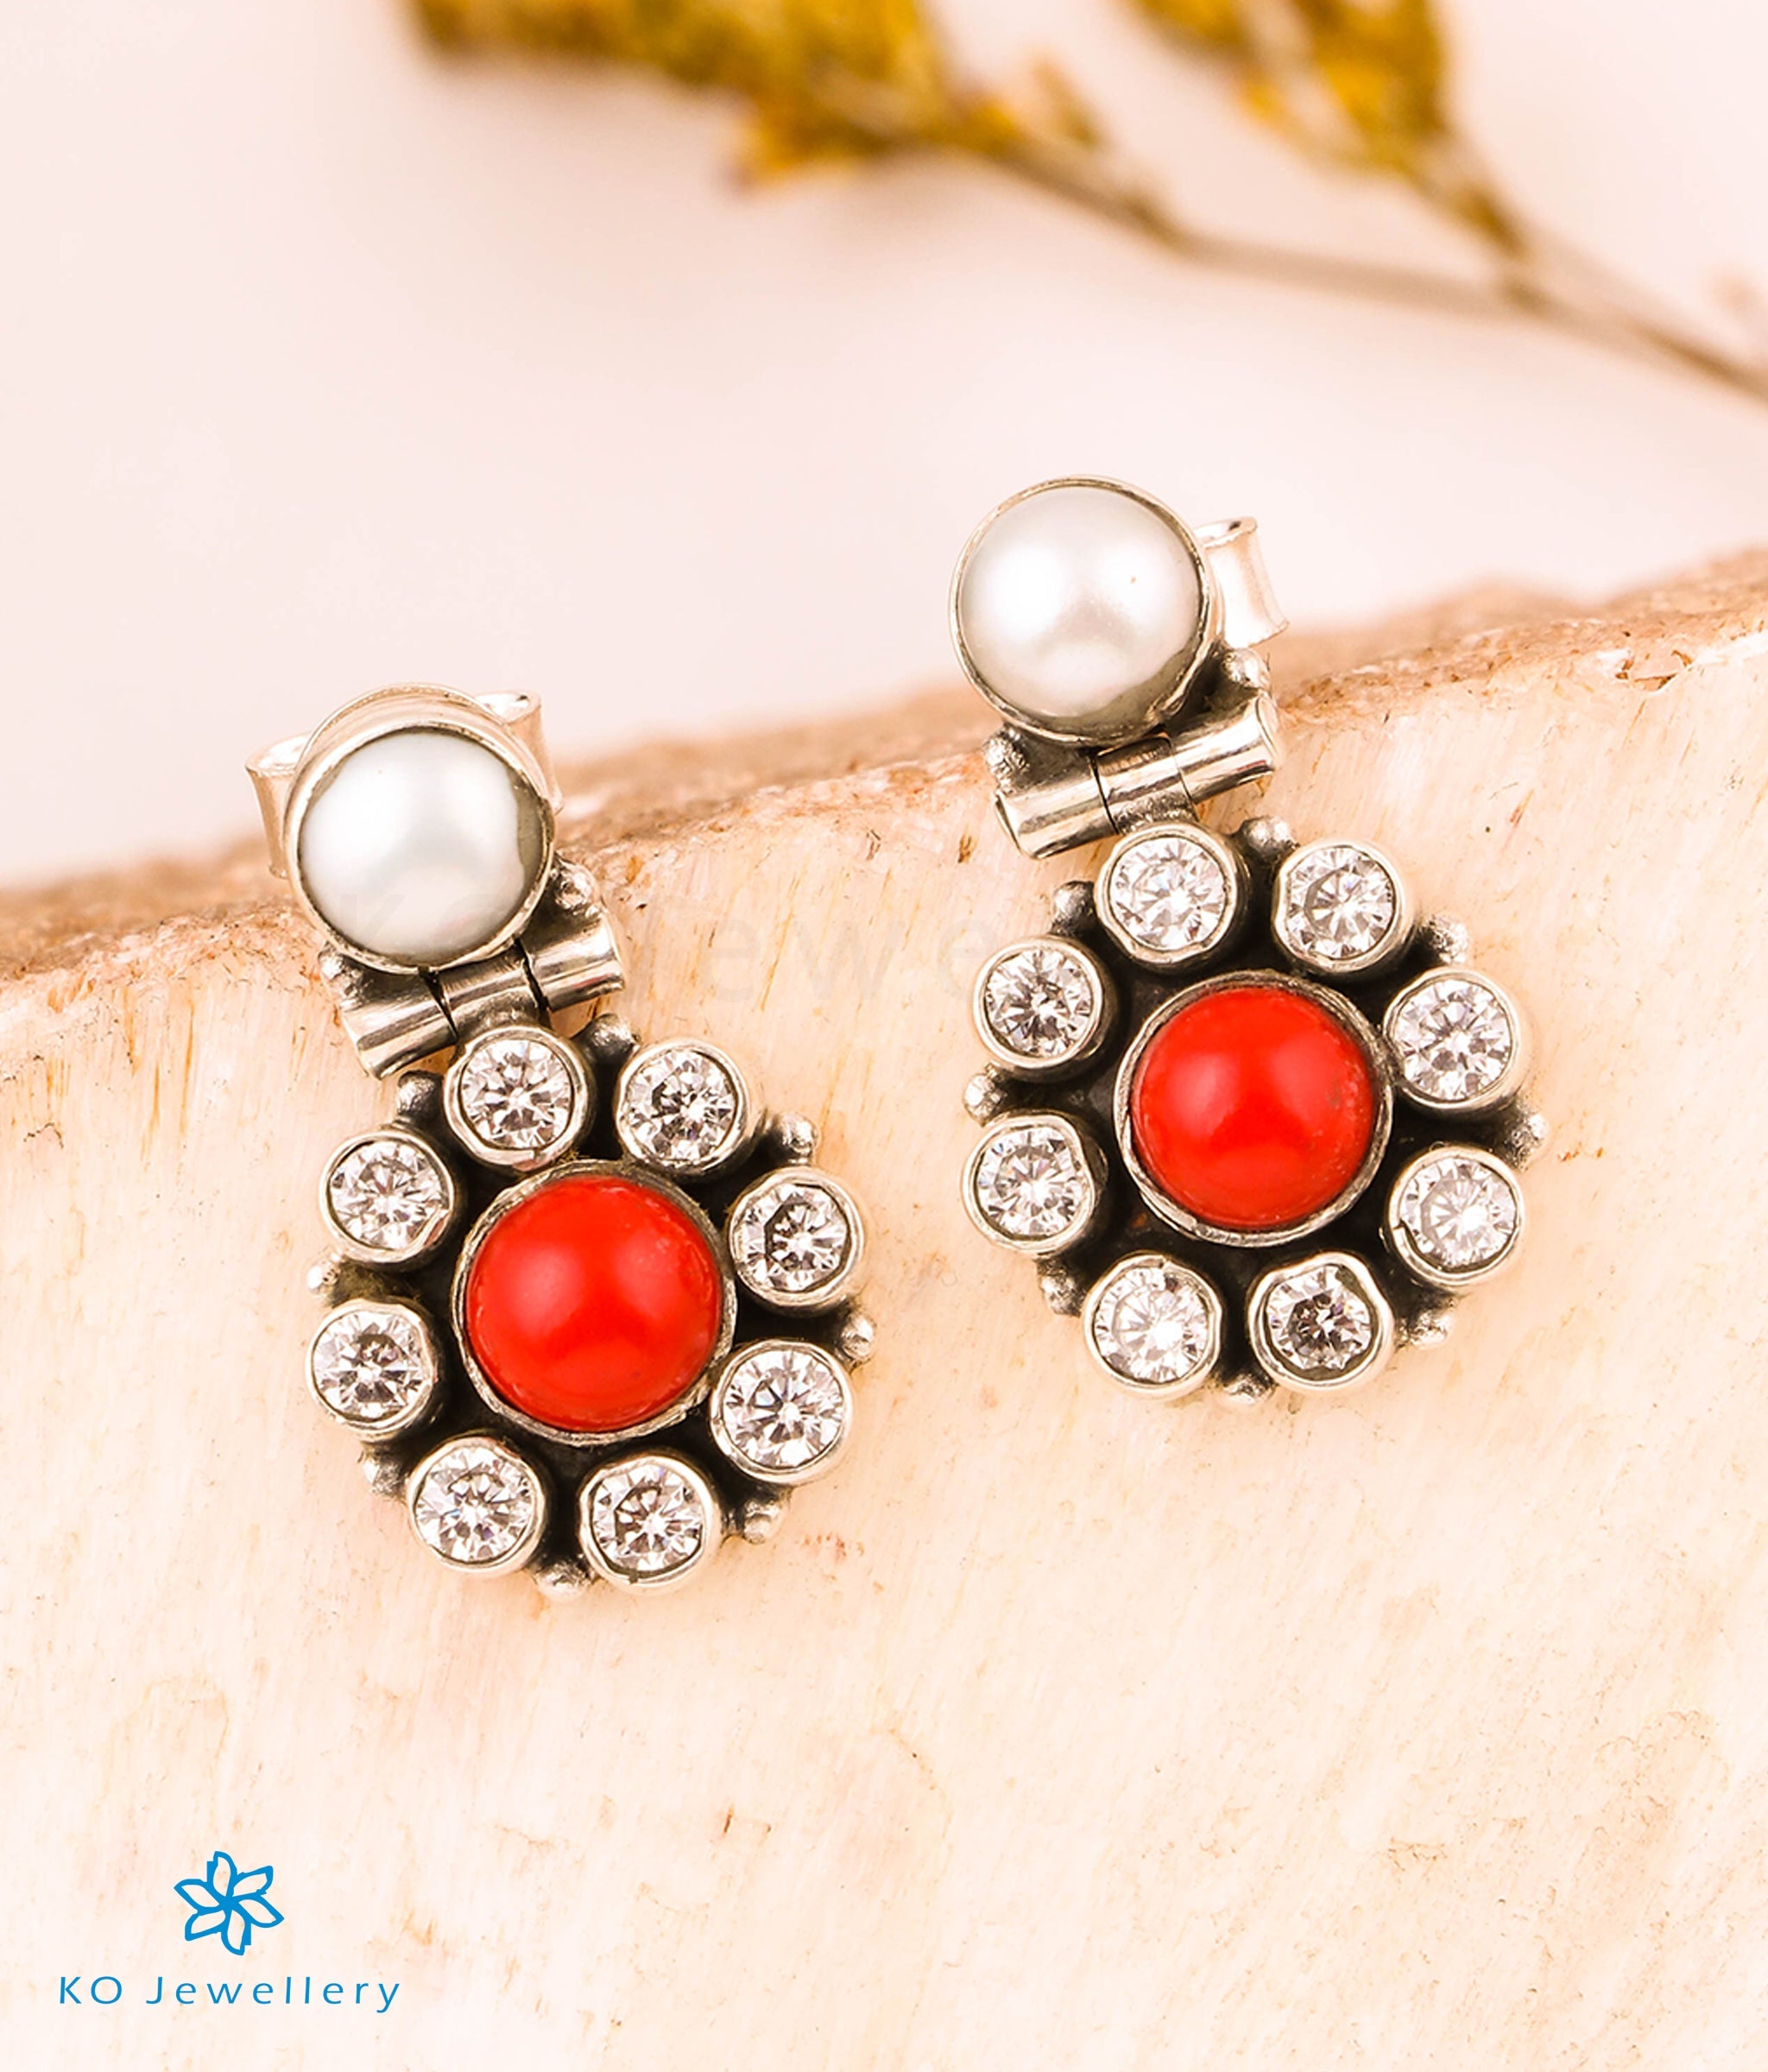 Coral earrings one gram gold - Radhas Creations - 182088